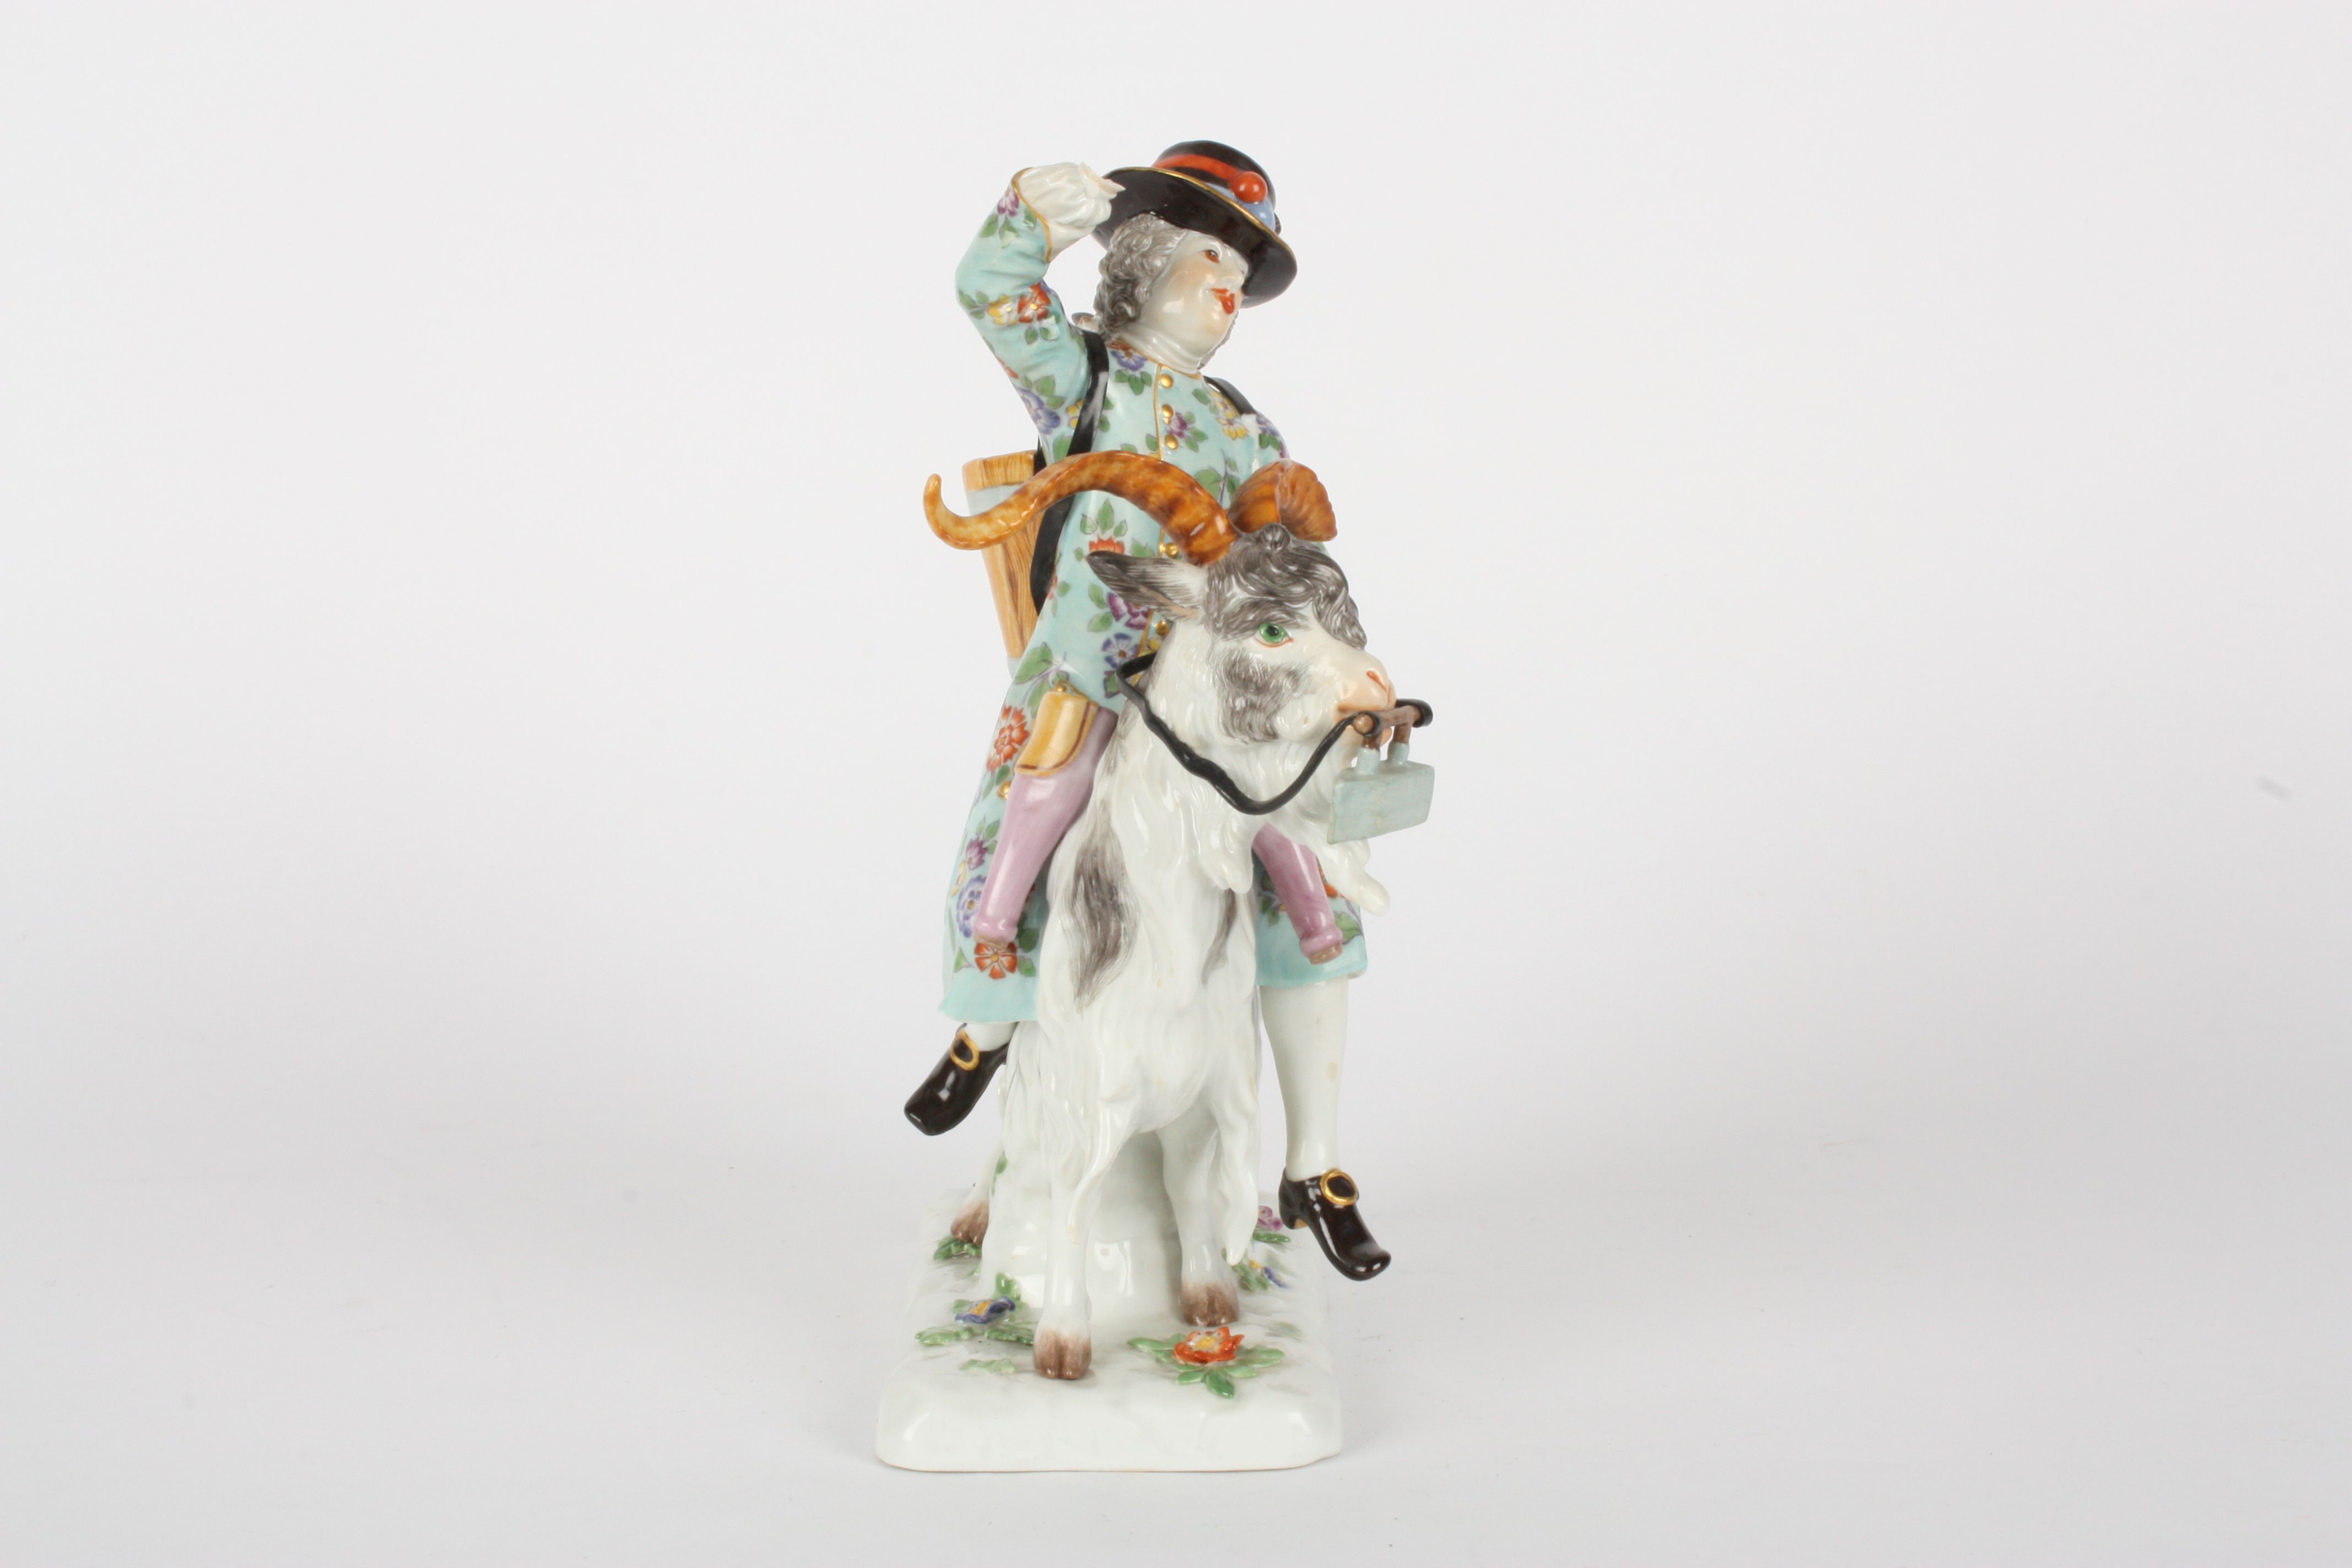 Late 20th century Meissen figure, Tailor on a Goat, after Kaendler, painted blue cross swords - Image 4 of 5